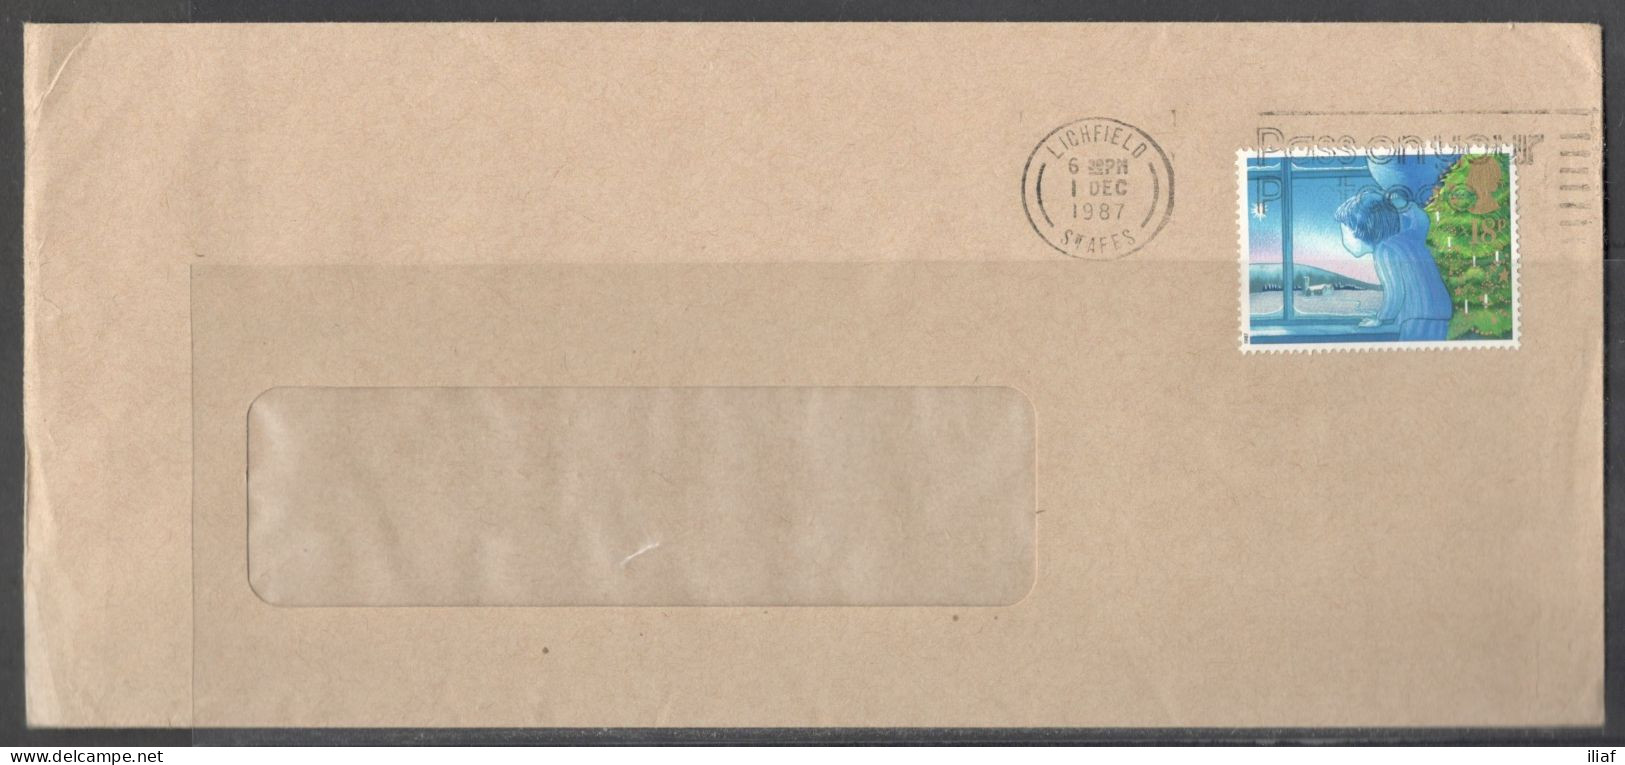 Great Britain - United Kingdom. Stamp Sc. 1197 On Letter, Sent From Lichfield On 1.12.87 - Lettres & Documents